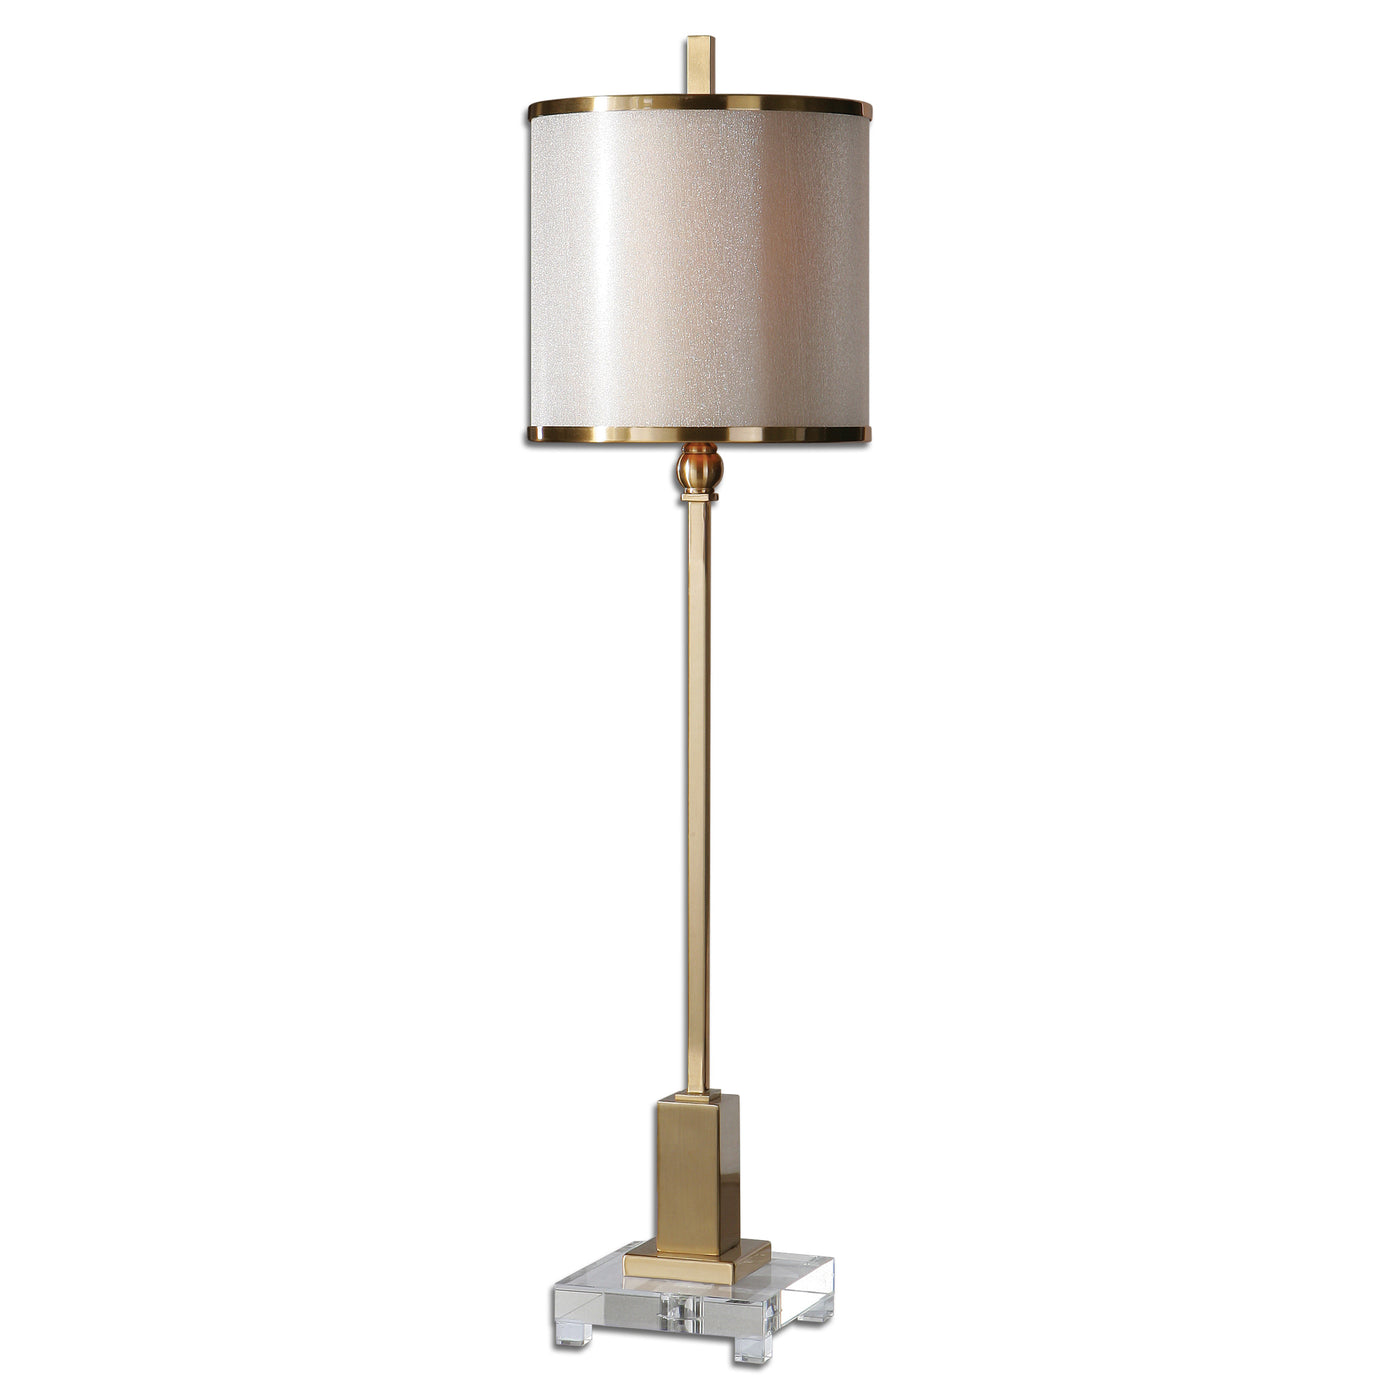 Brushed Brass Plated Metal Accented With A Crystal Foot. The Double Hardback Shades Are A Golden Champagne Inner Shade Wit...